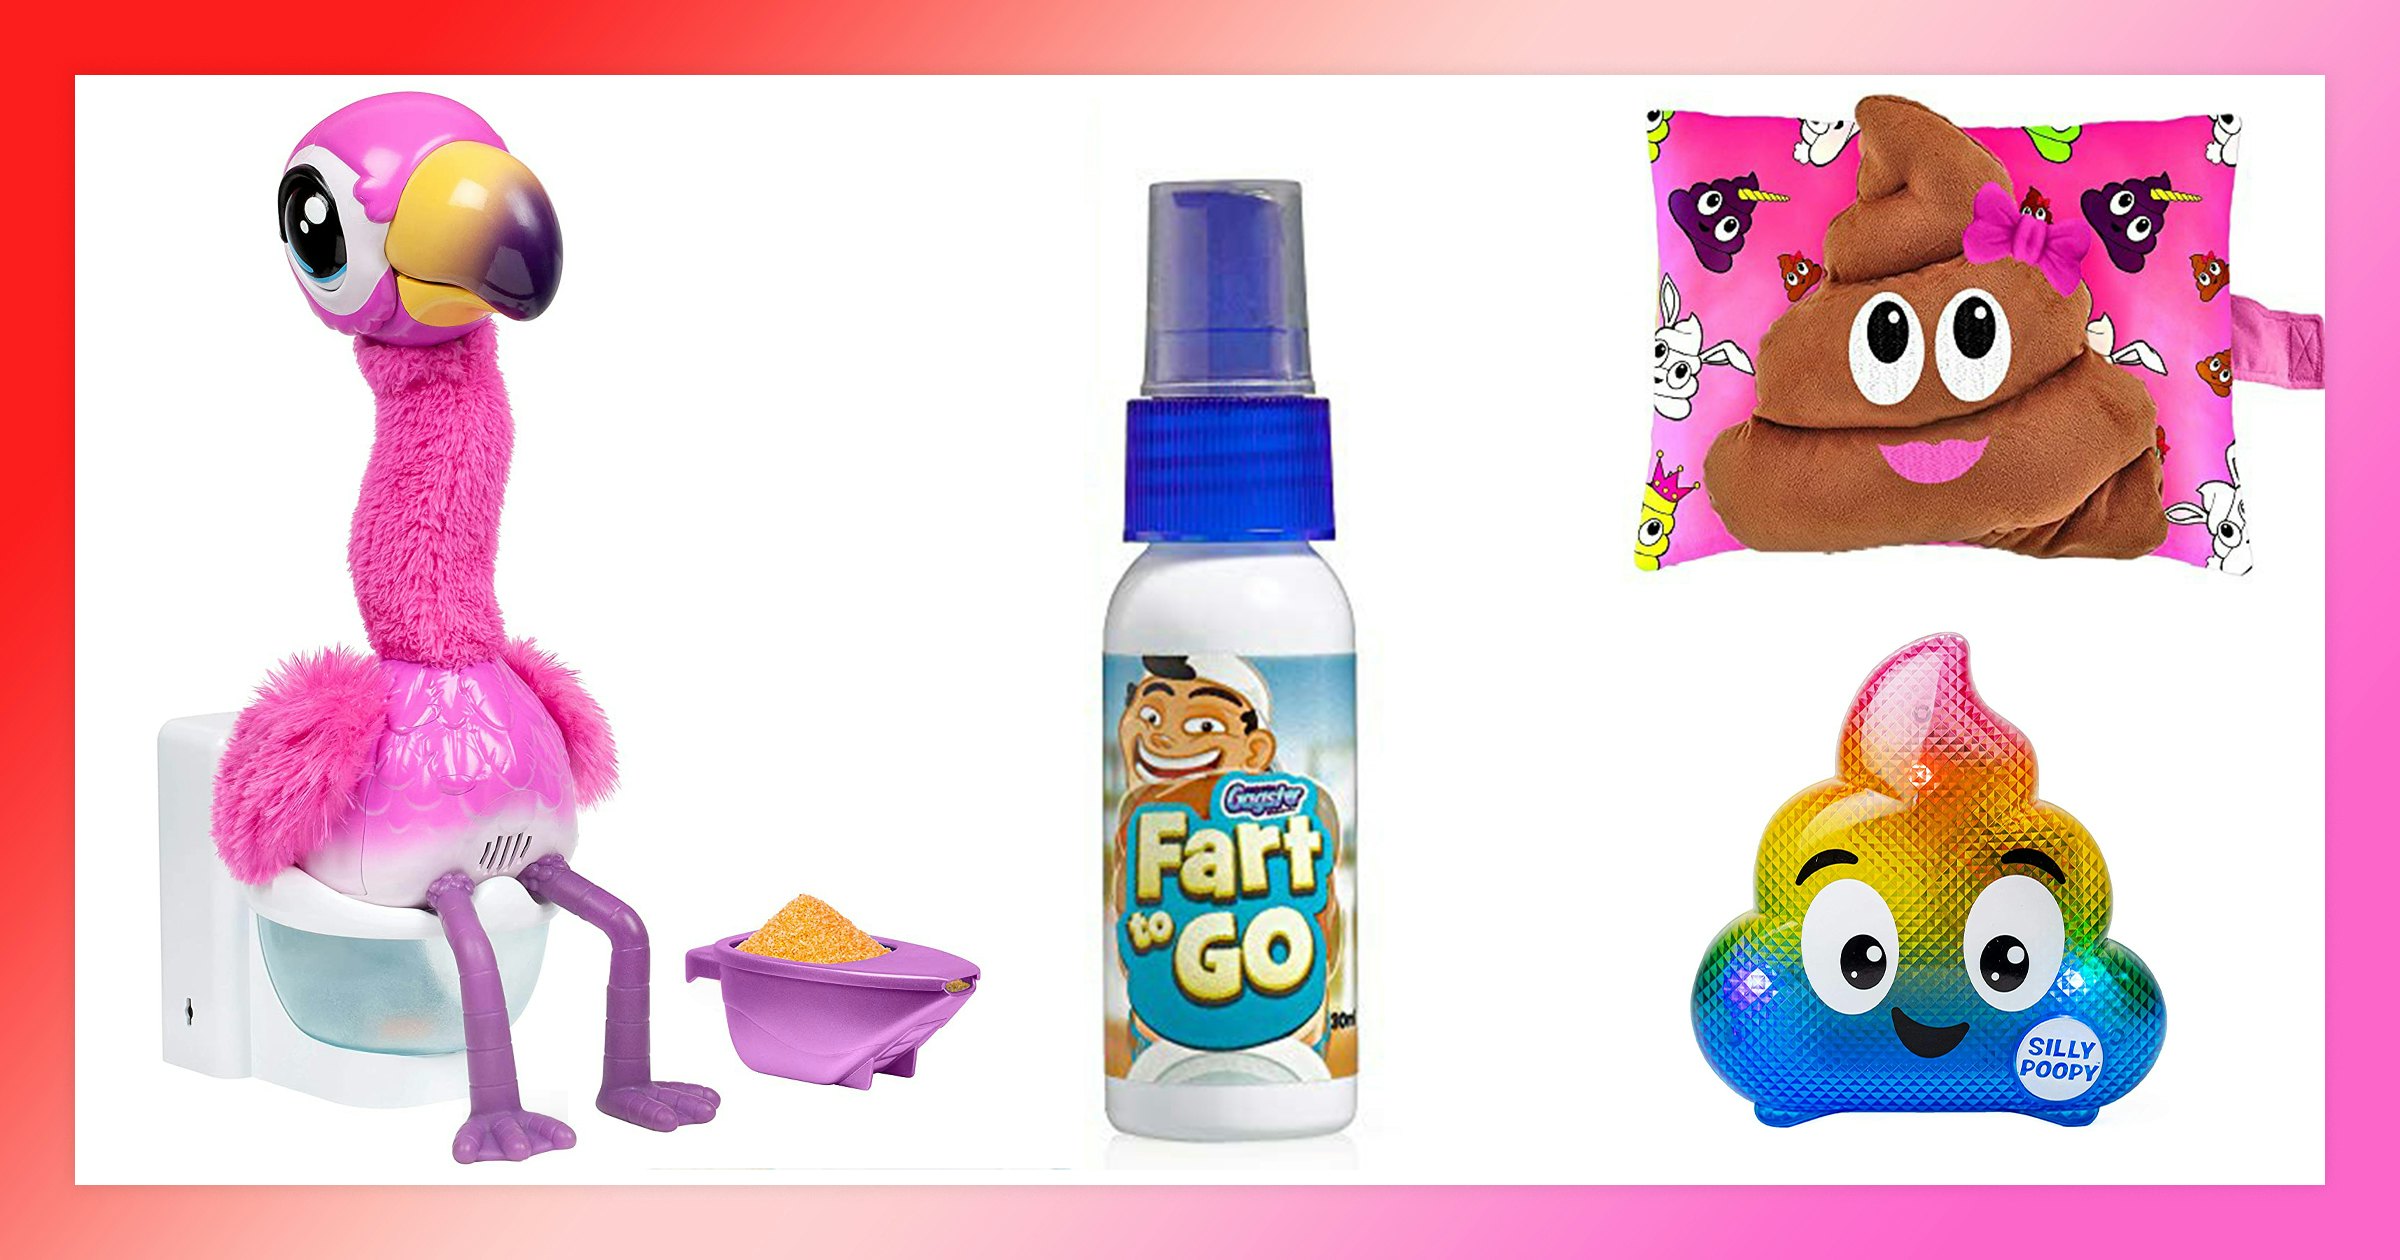 You Didn't Ask, But Here They Are Anyway: 10 Best Poop Toys Of 2021